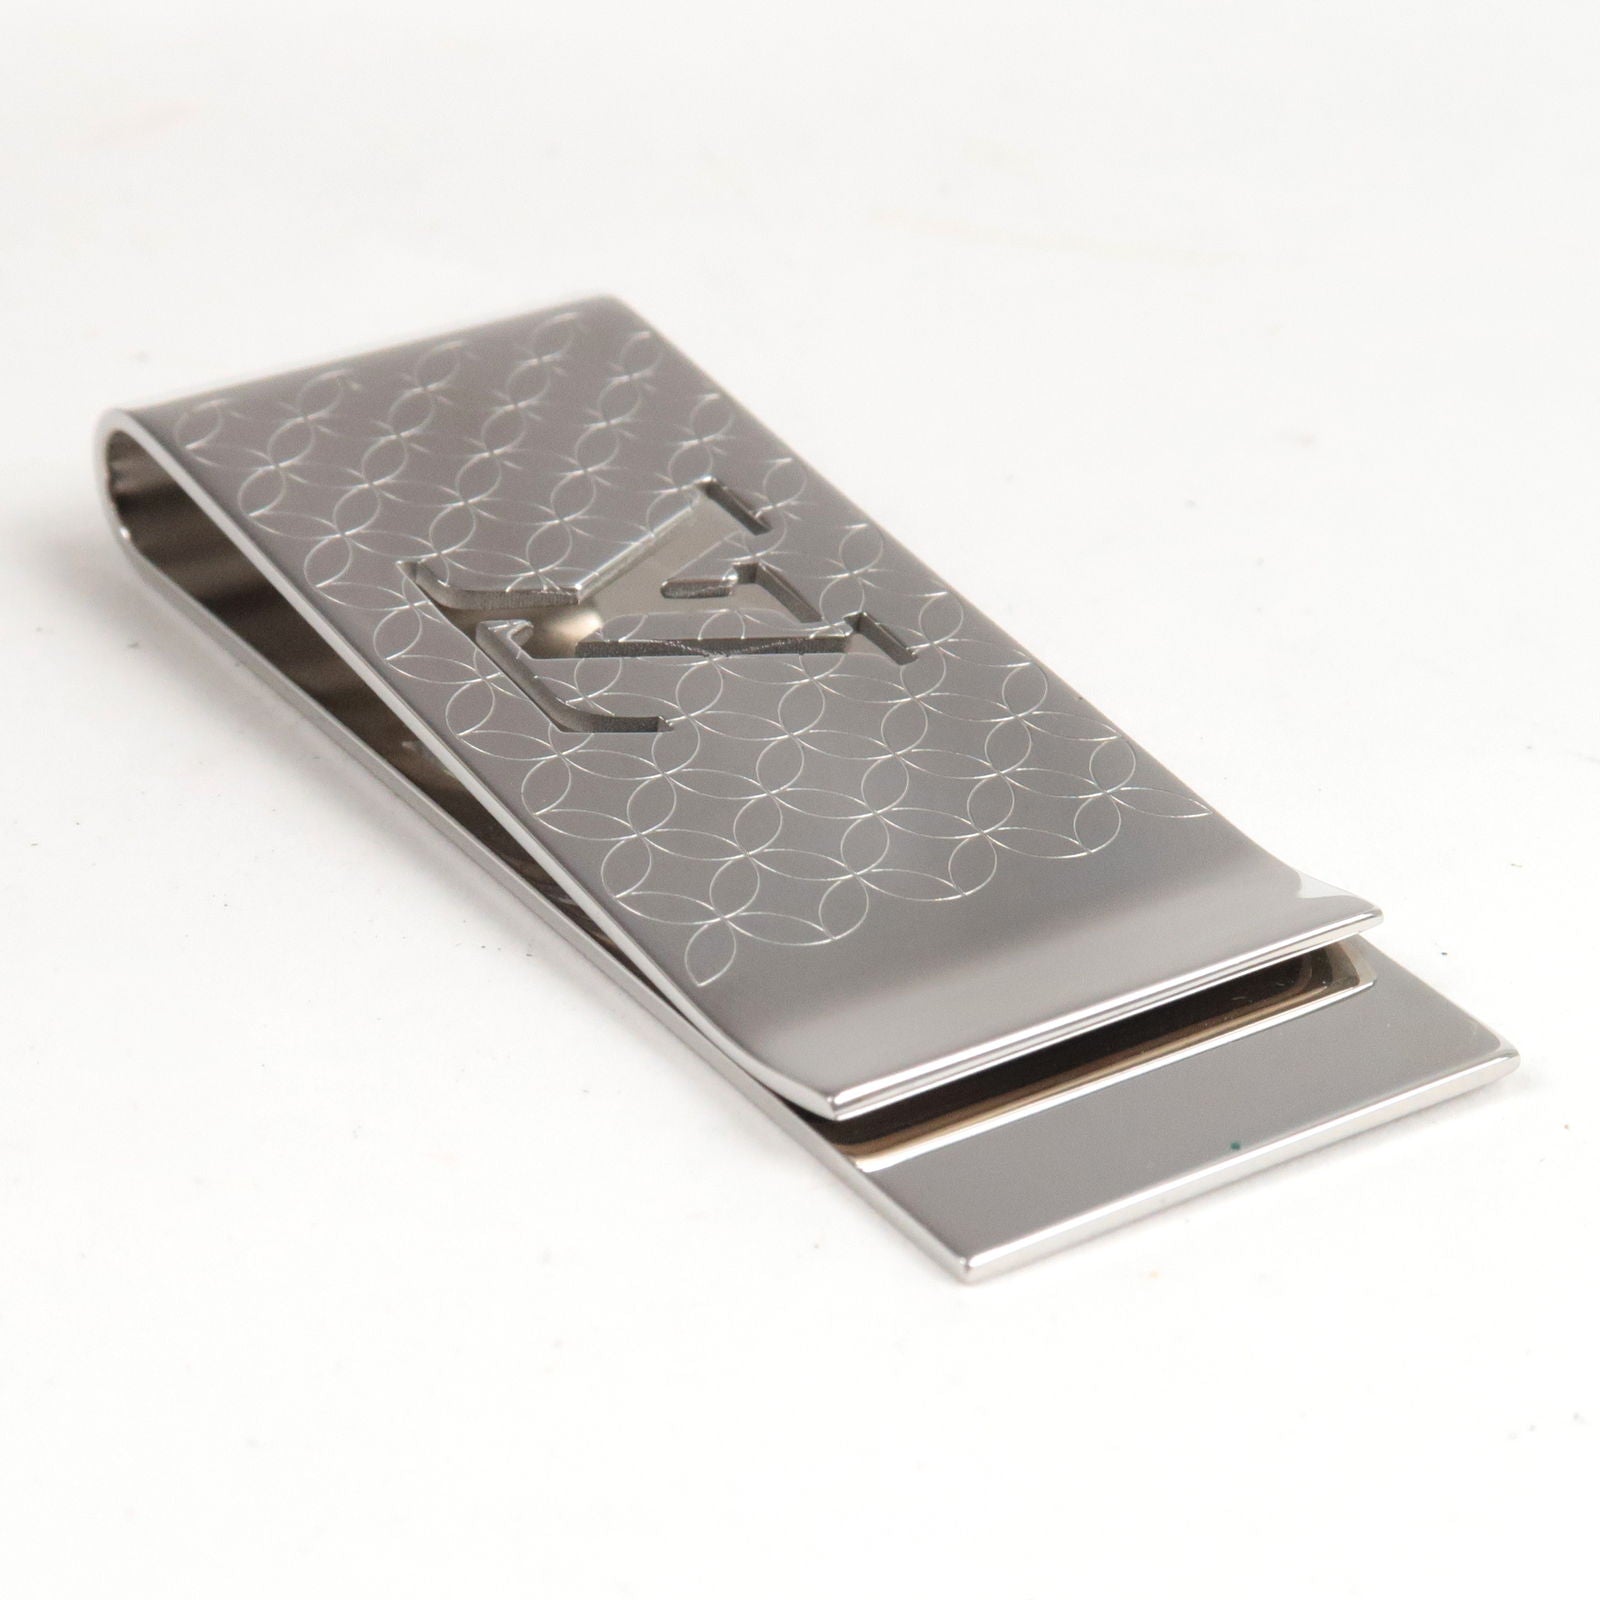 This is a necessity for me! The LV Champ Elysees Tie Pin is